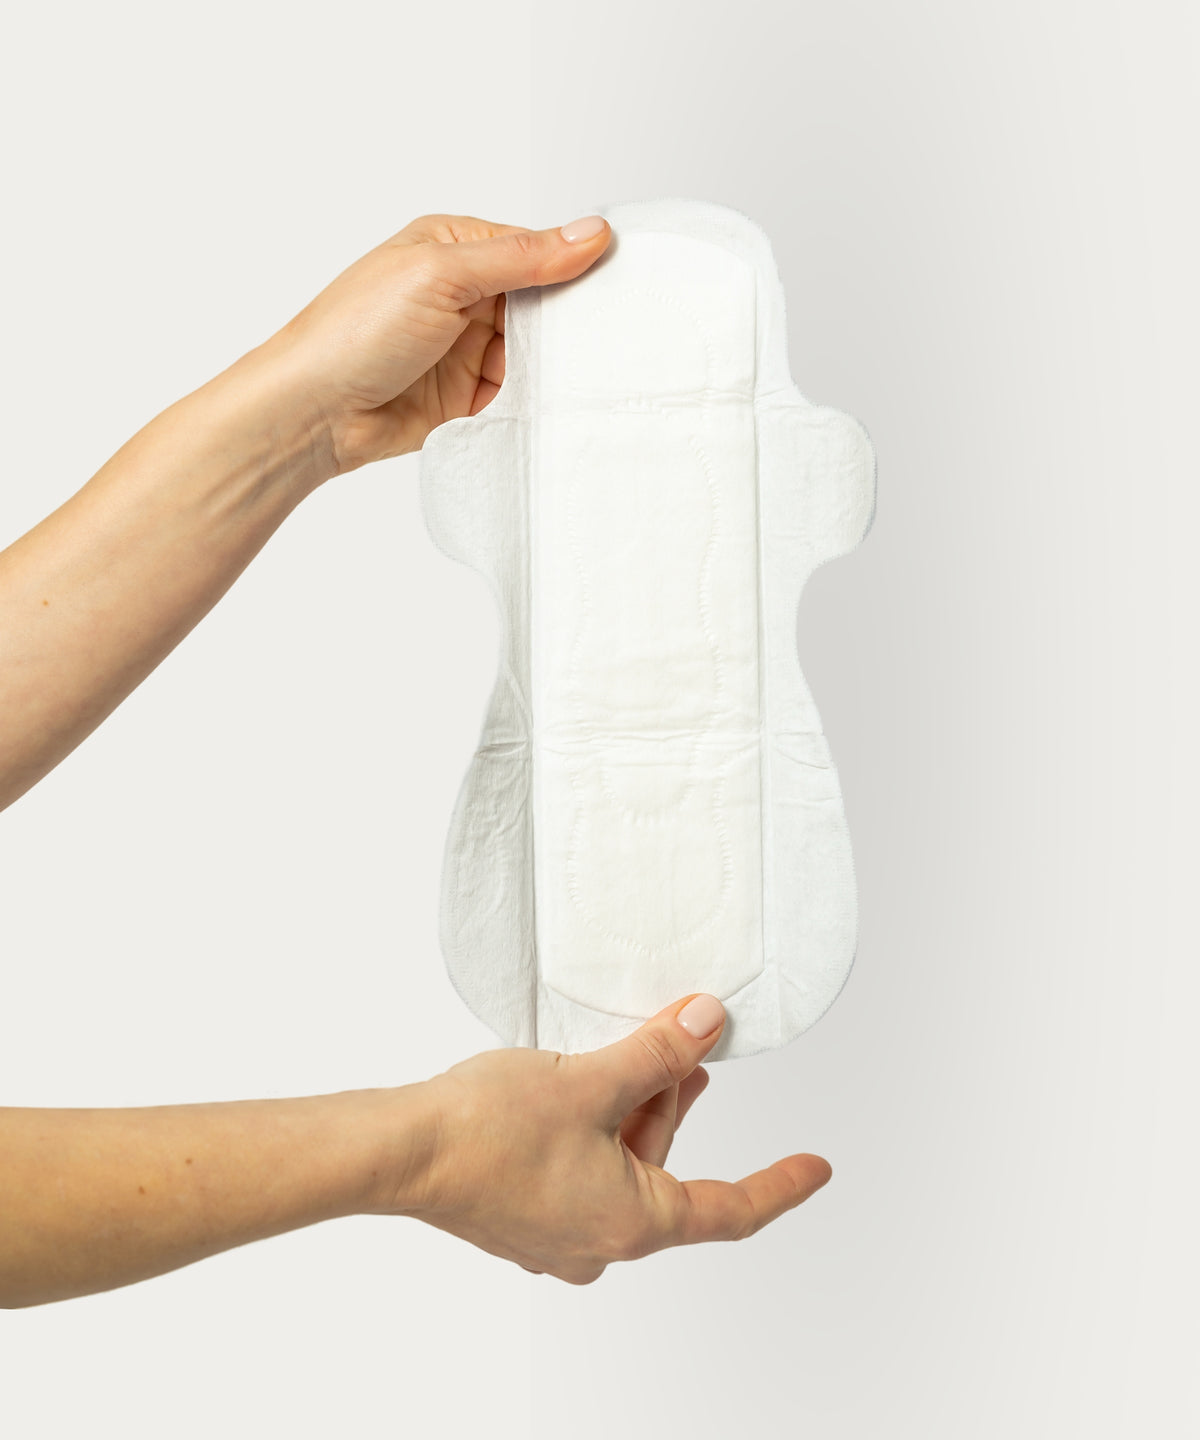 Hands holding Nyssa Organic Cotton Cover Overnight Period Pads